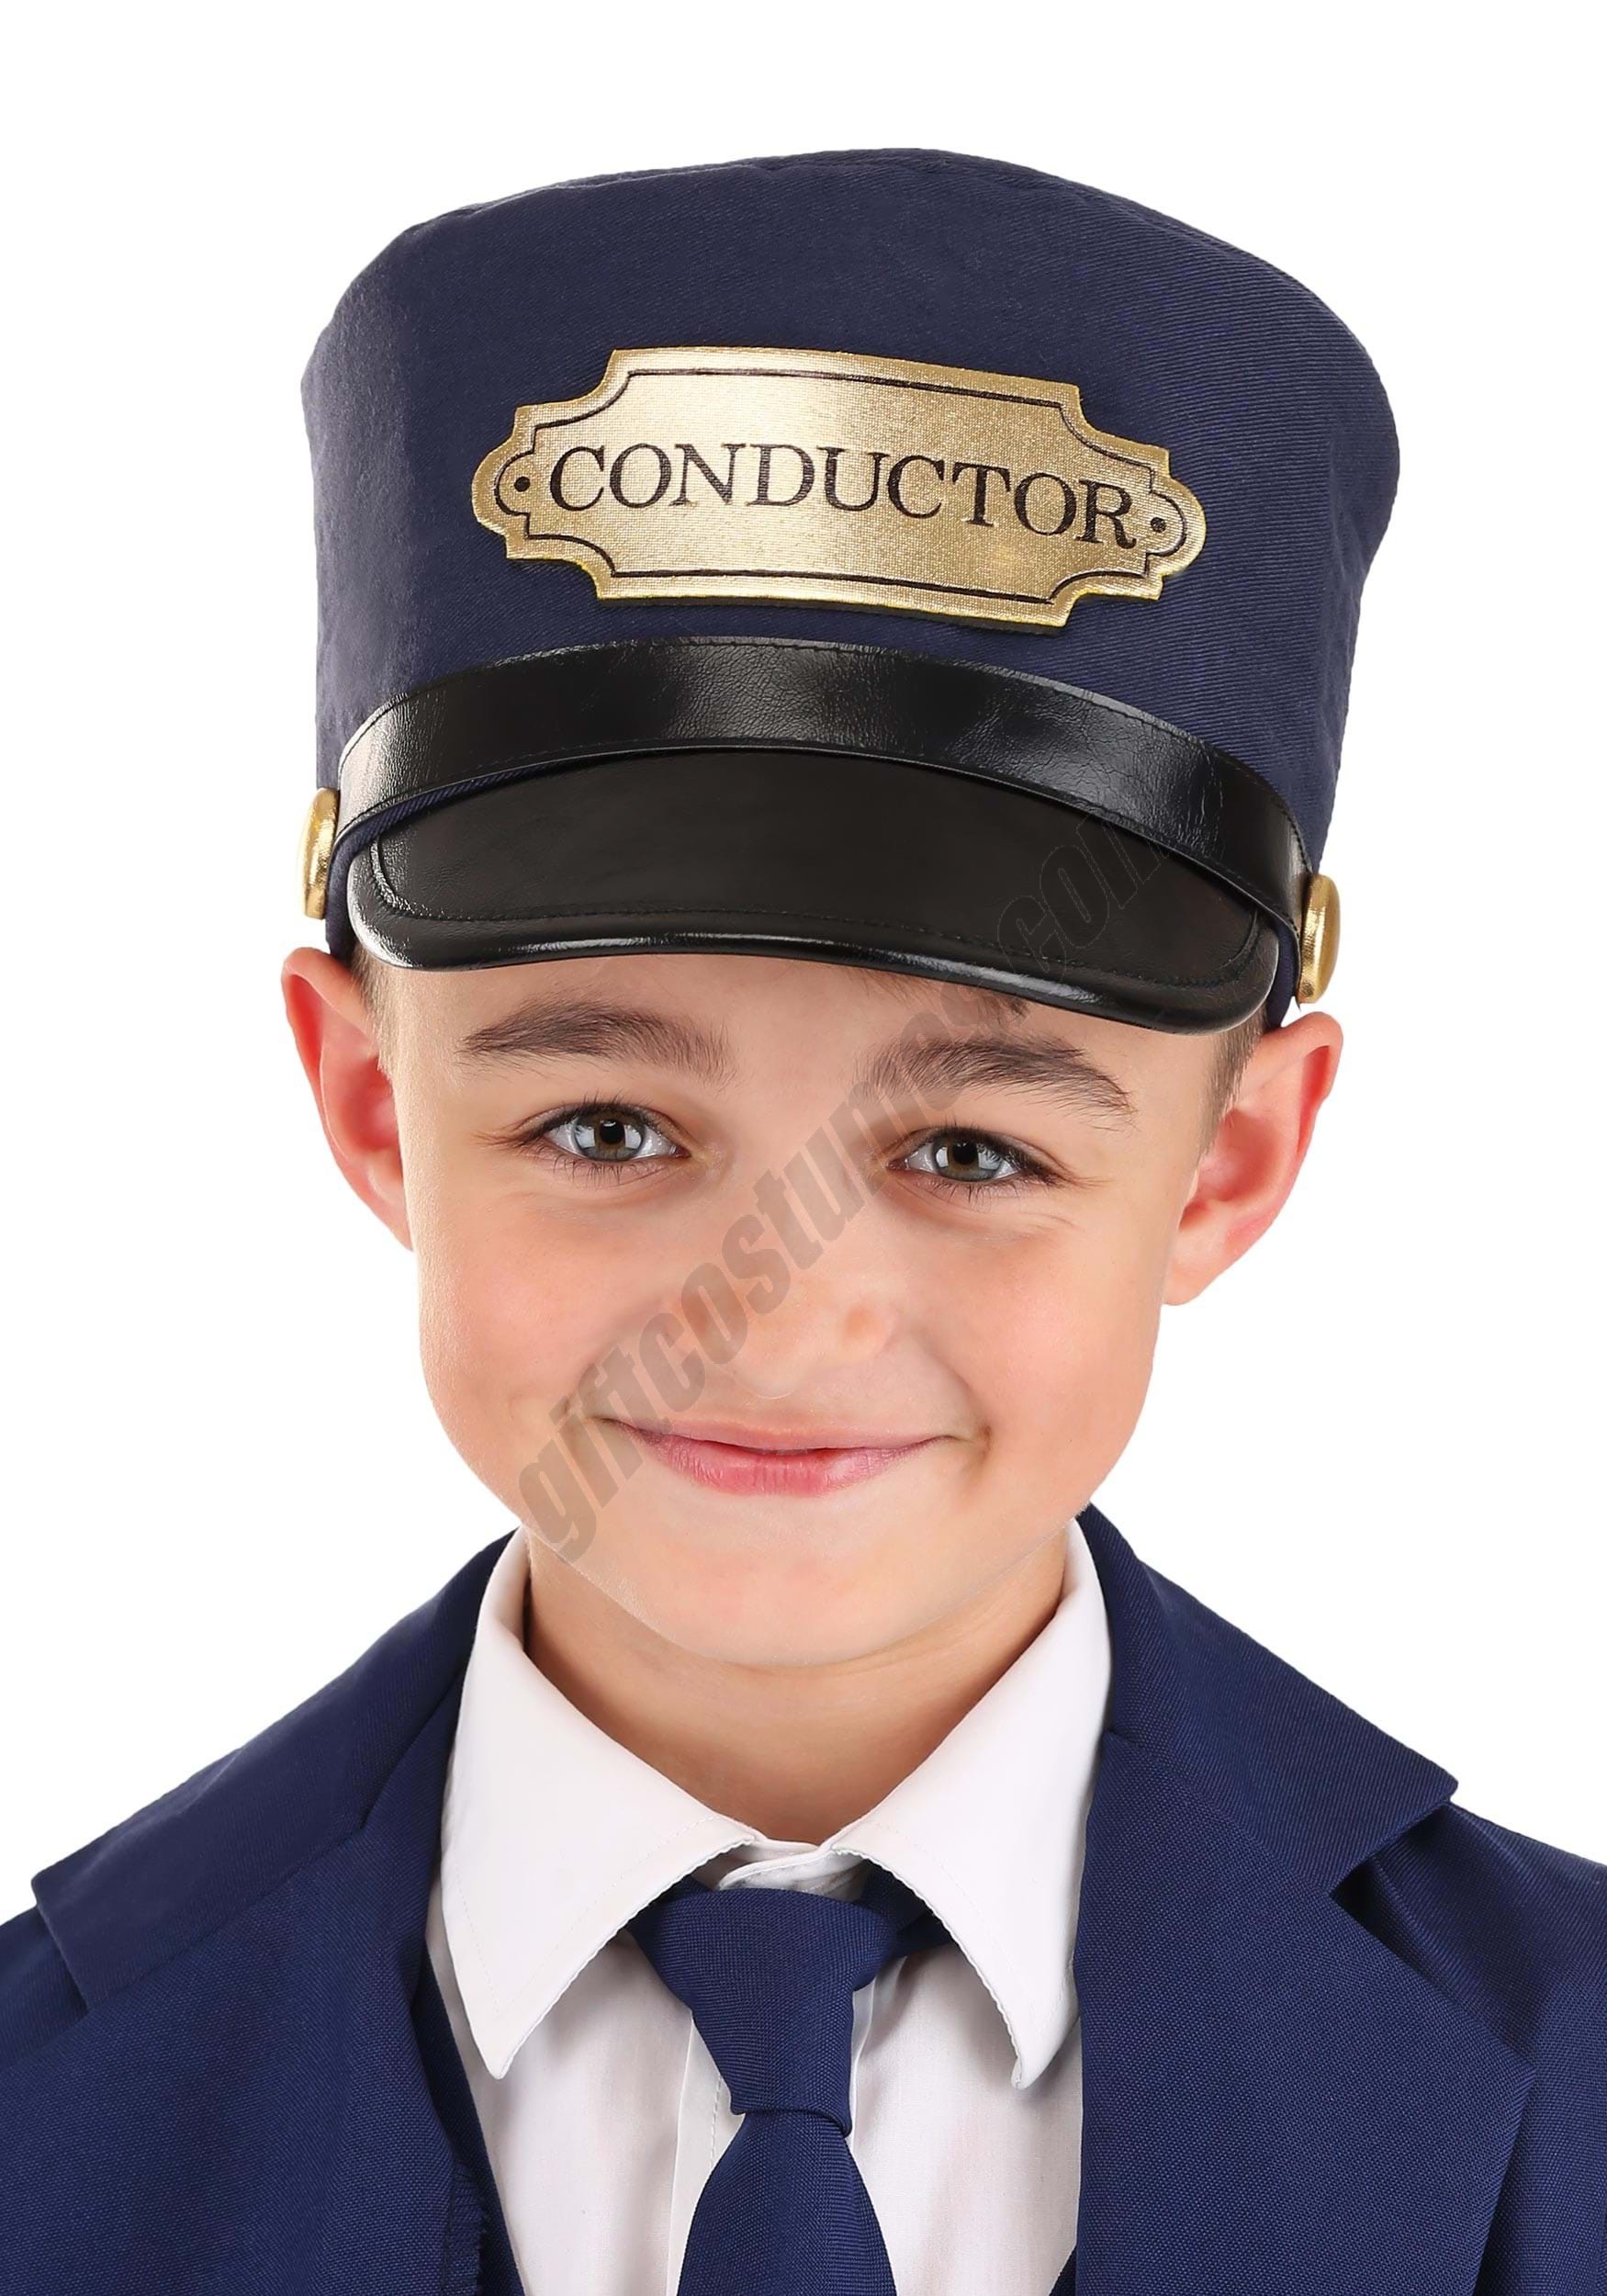 Train Conductor Hat for Kids Promotions - Train Conductor Hat for Kids Promotions